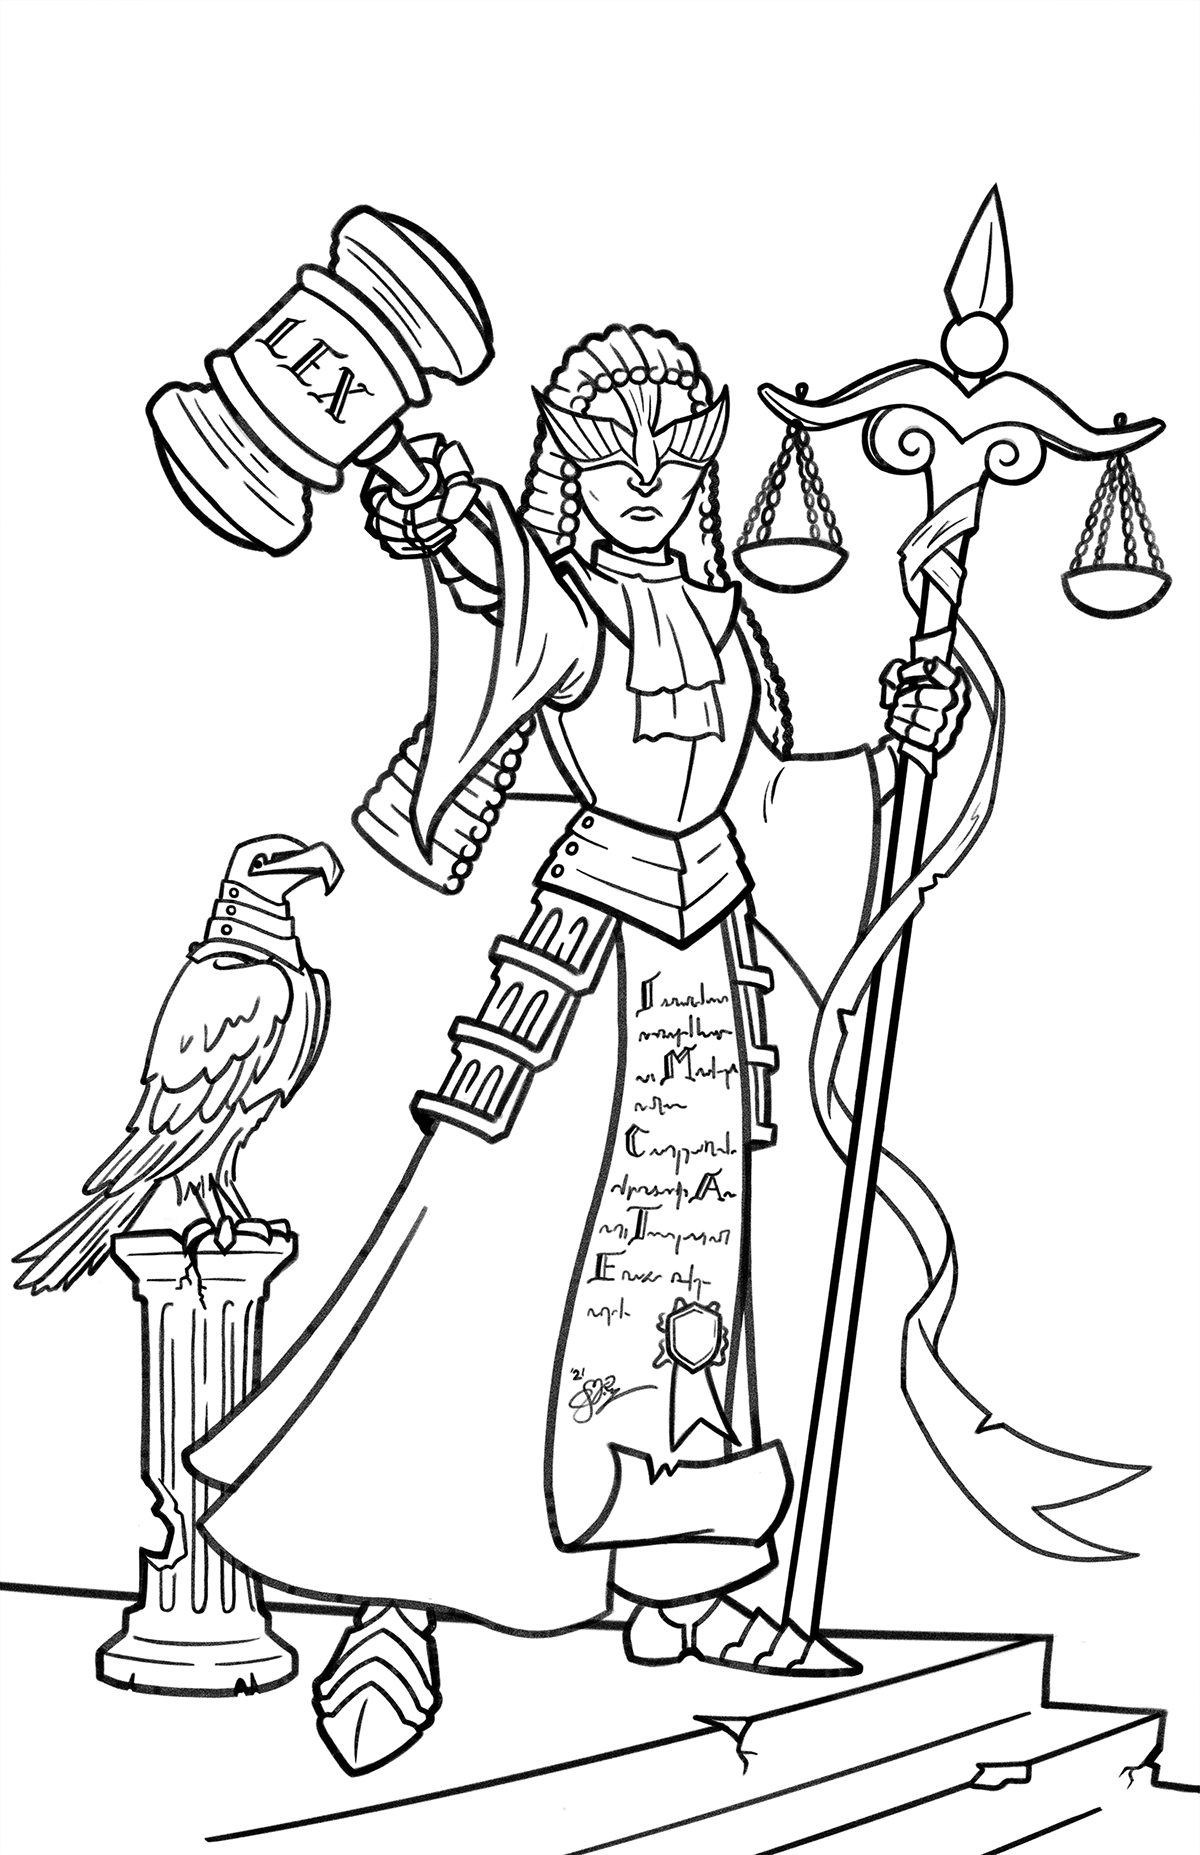 cali pigeon games calling all knights card game concept art court Drawing  eagle judge Justice law